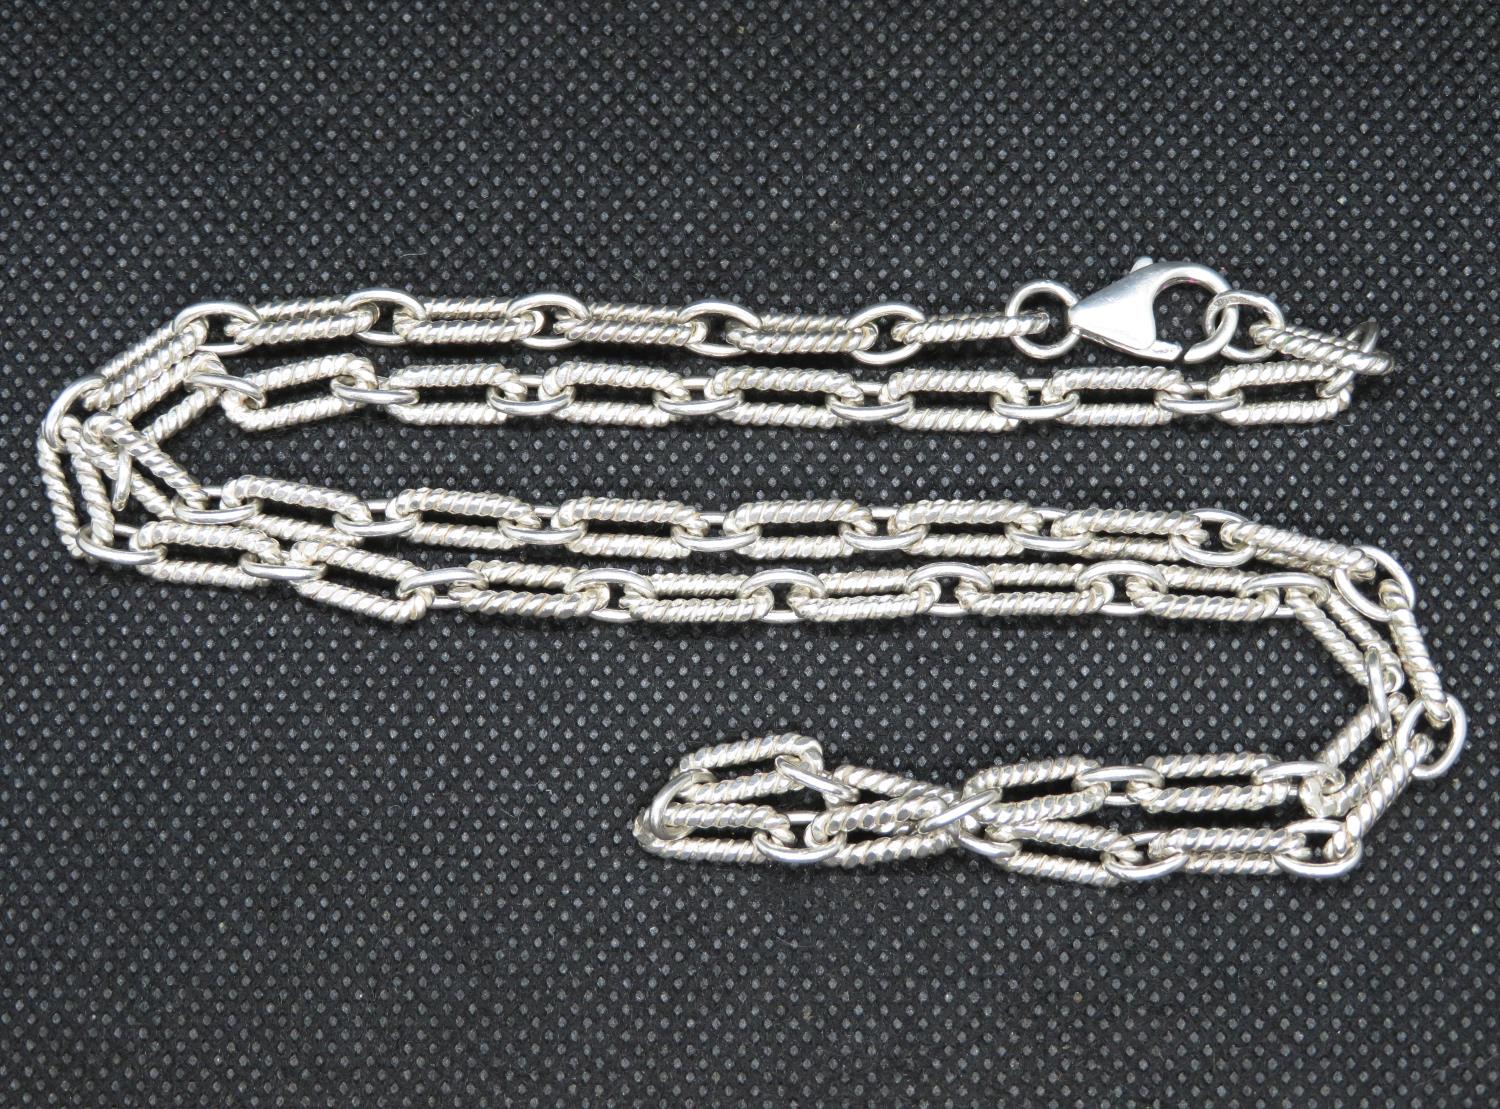 Vintage silver chain 24" import marks London 1995 38.6g